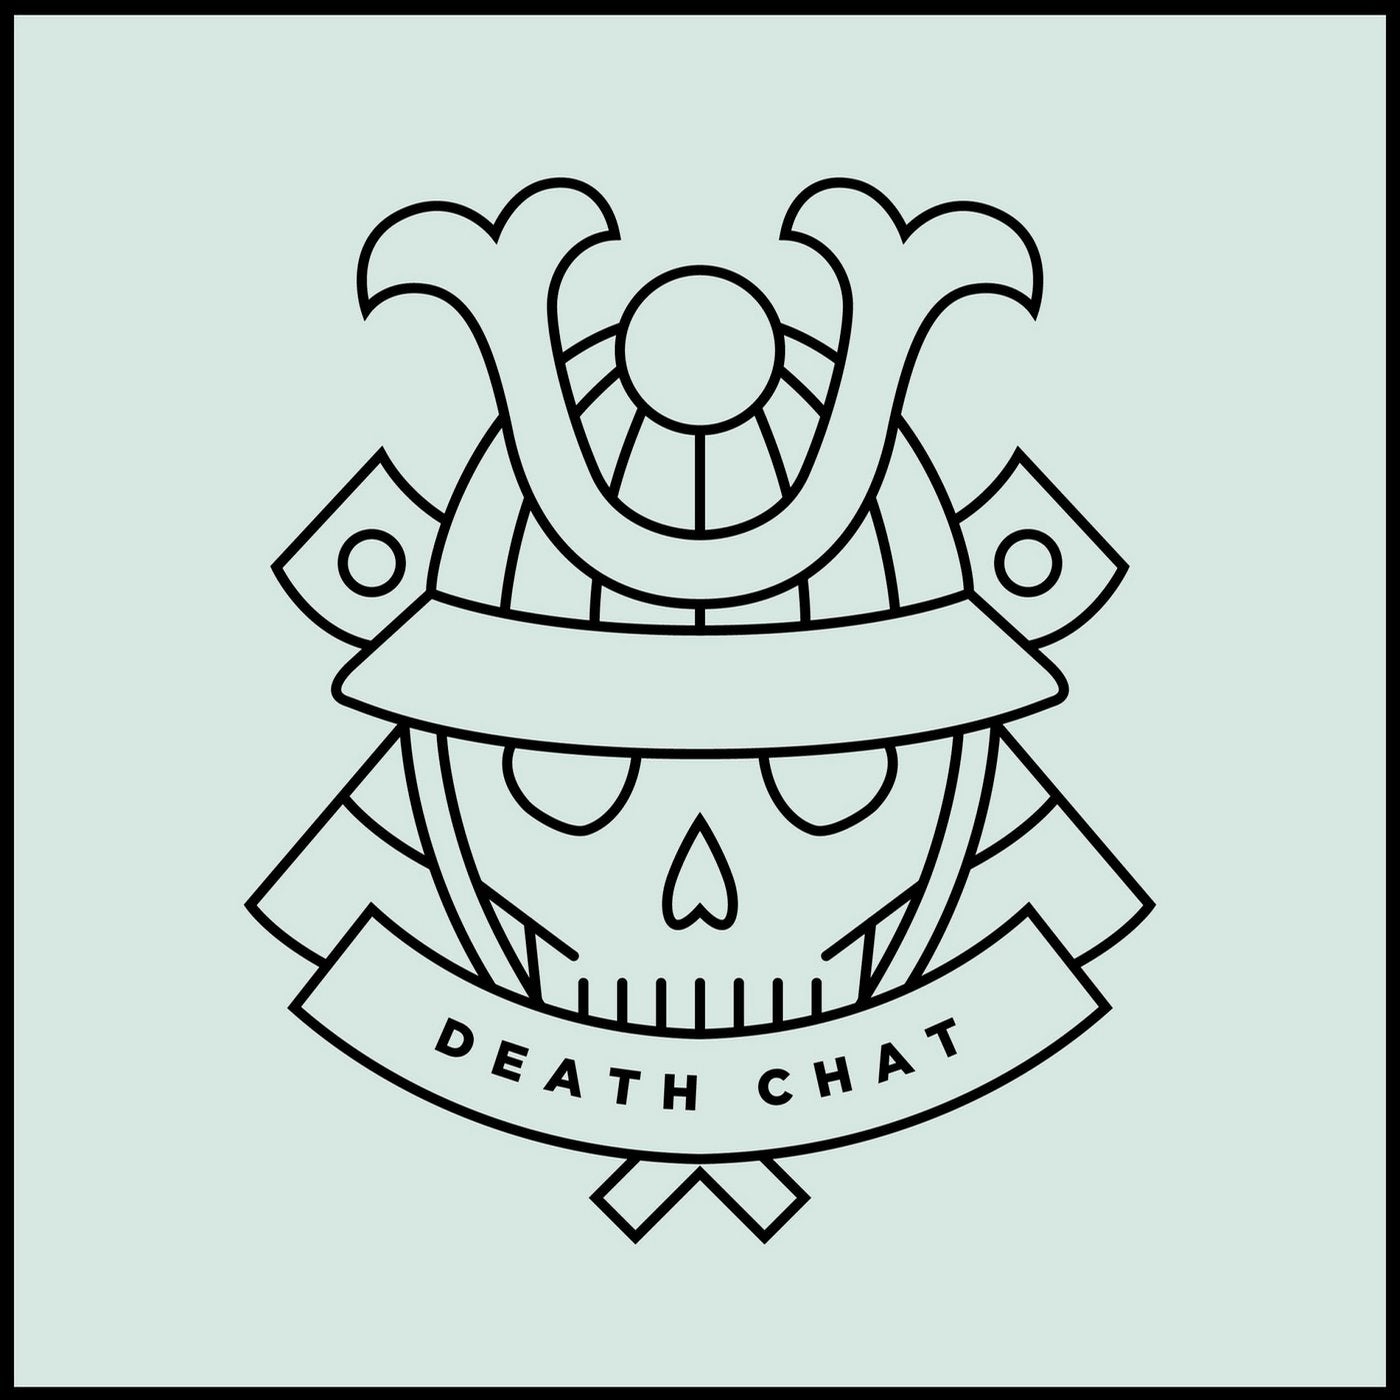 Death Chat